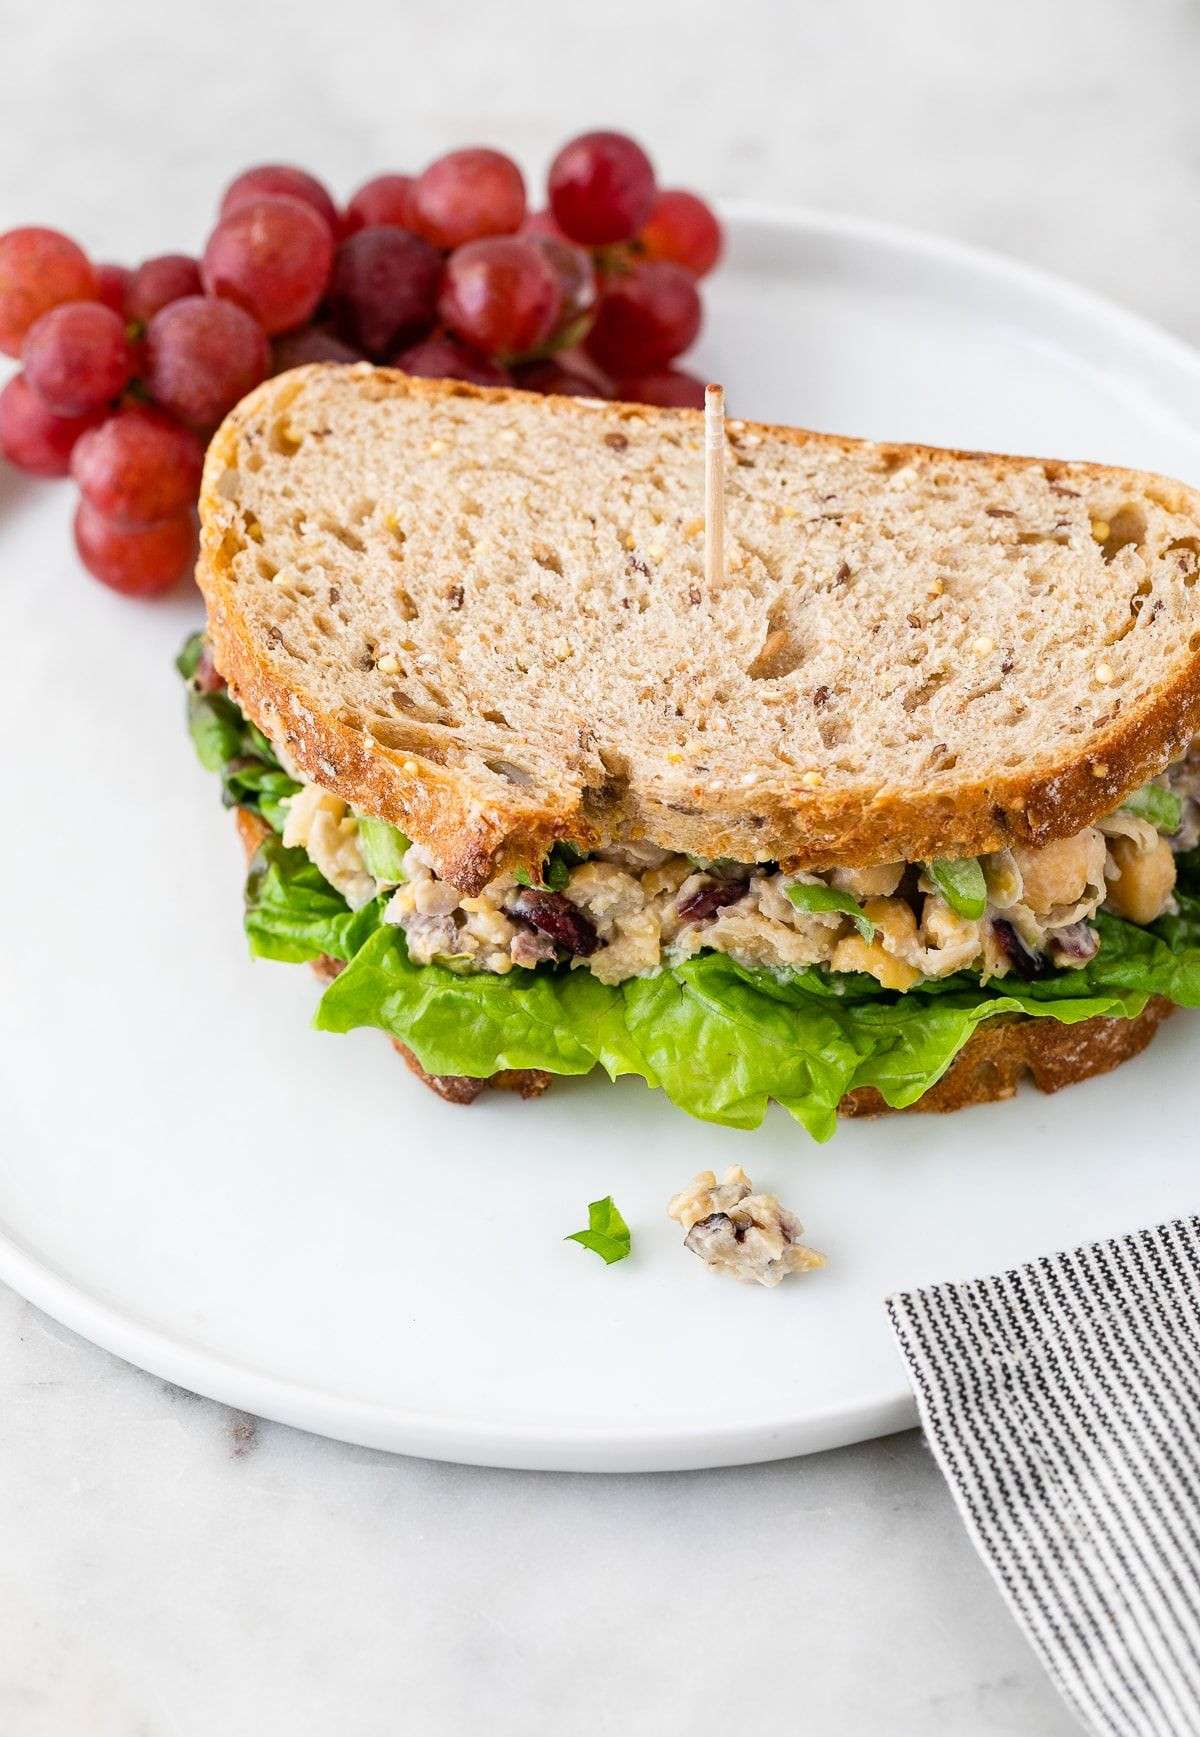 Whole Foods Vegan Chicken Salad
 Vegan Chicken Salad is a flavorful quick and easy salad